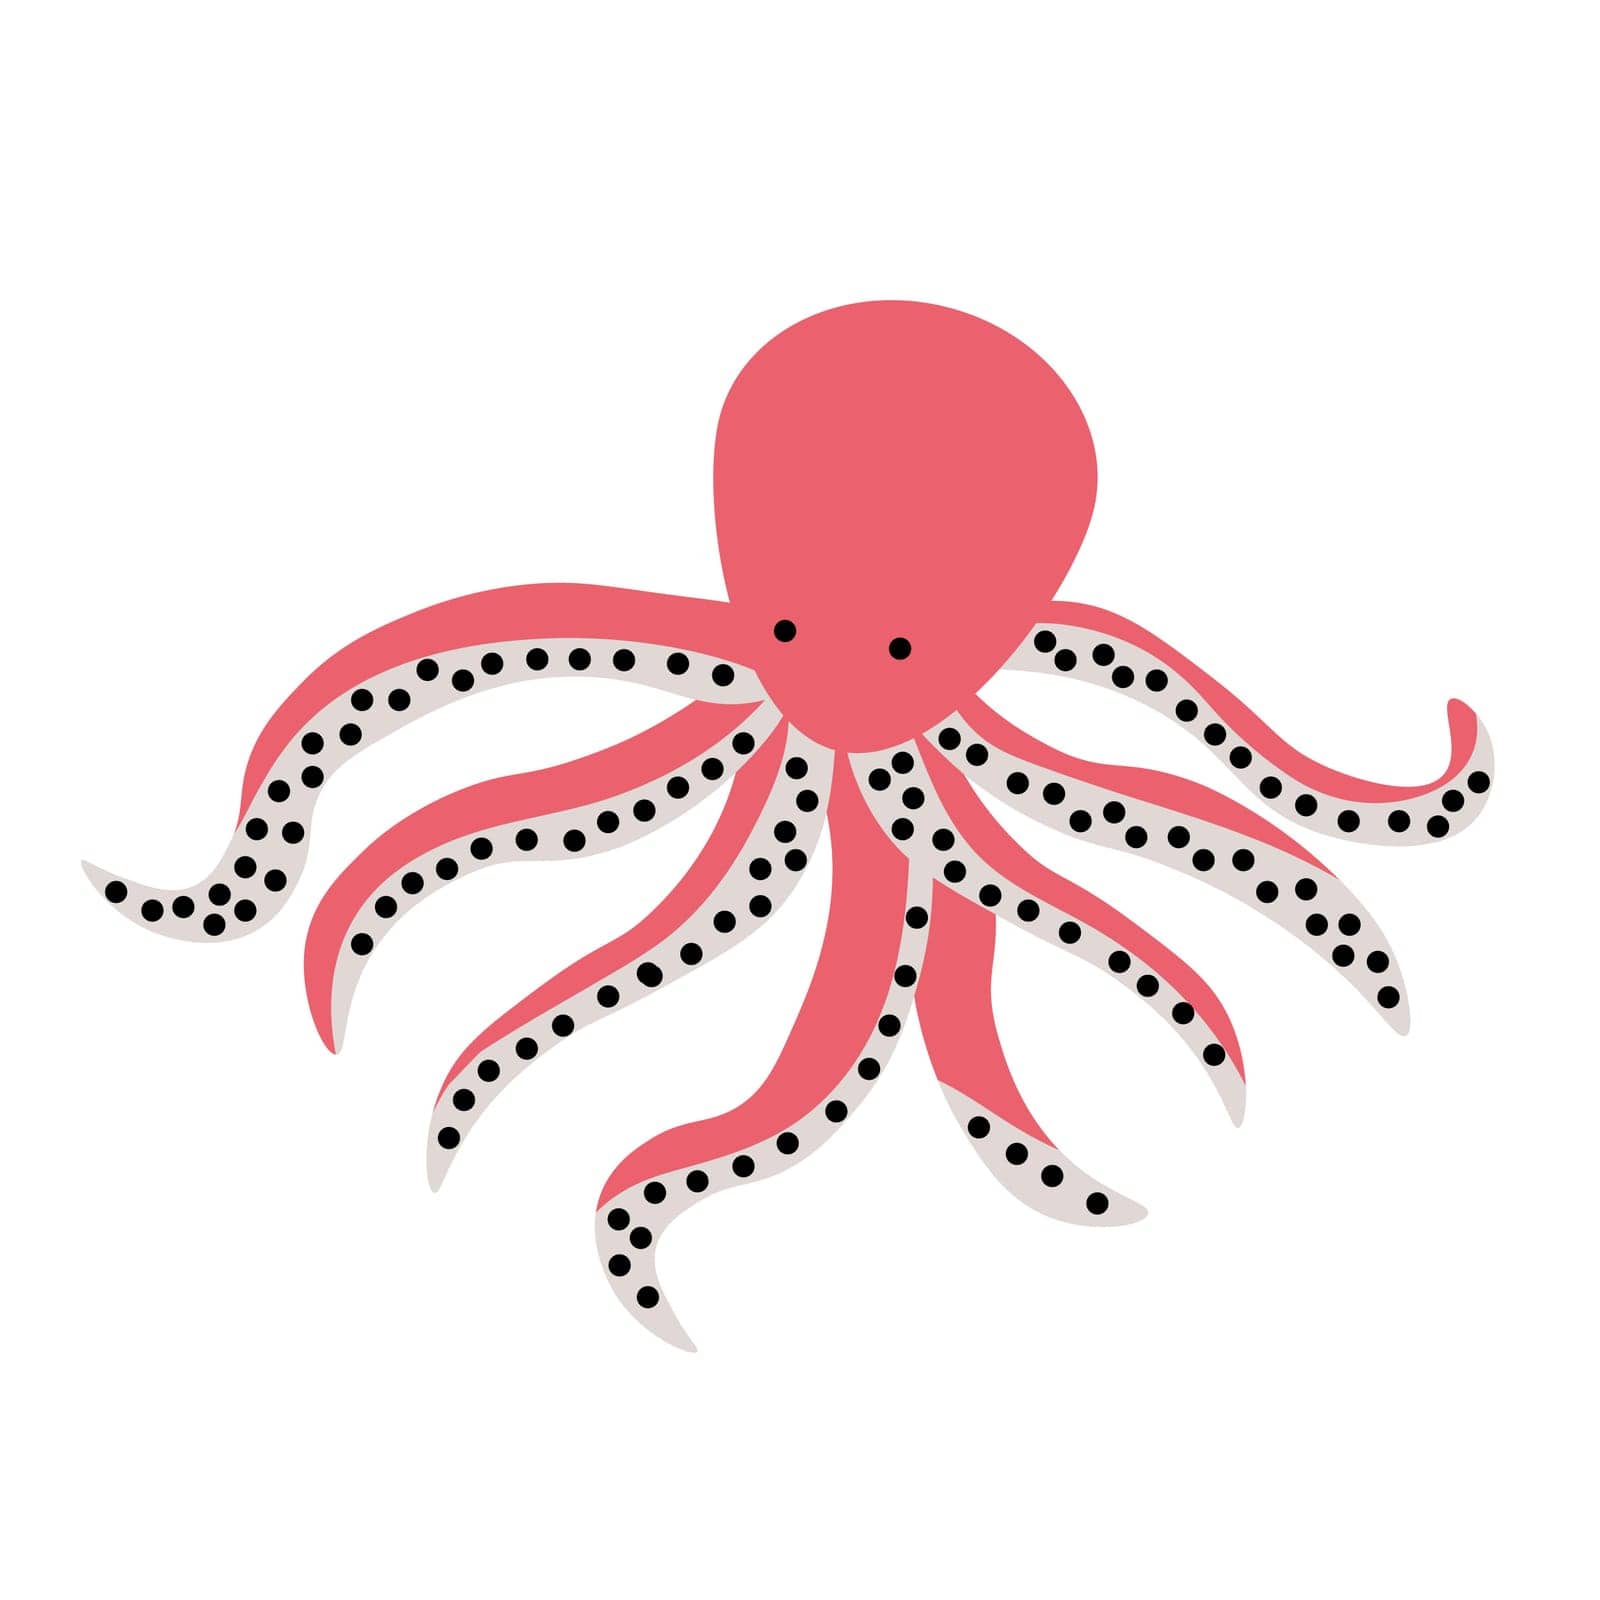 Red octopus cartoon character. Cute octopus flat vector isolated on white background. Aquatic fauna. Octopus icon. Animal illustration for zoo ad, nature concept, children book illustrating EPS by Alxyzt